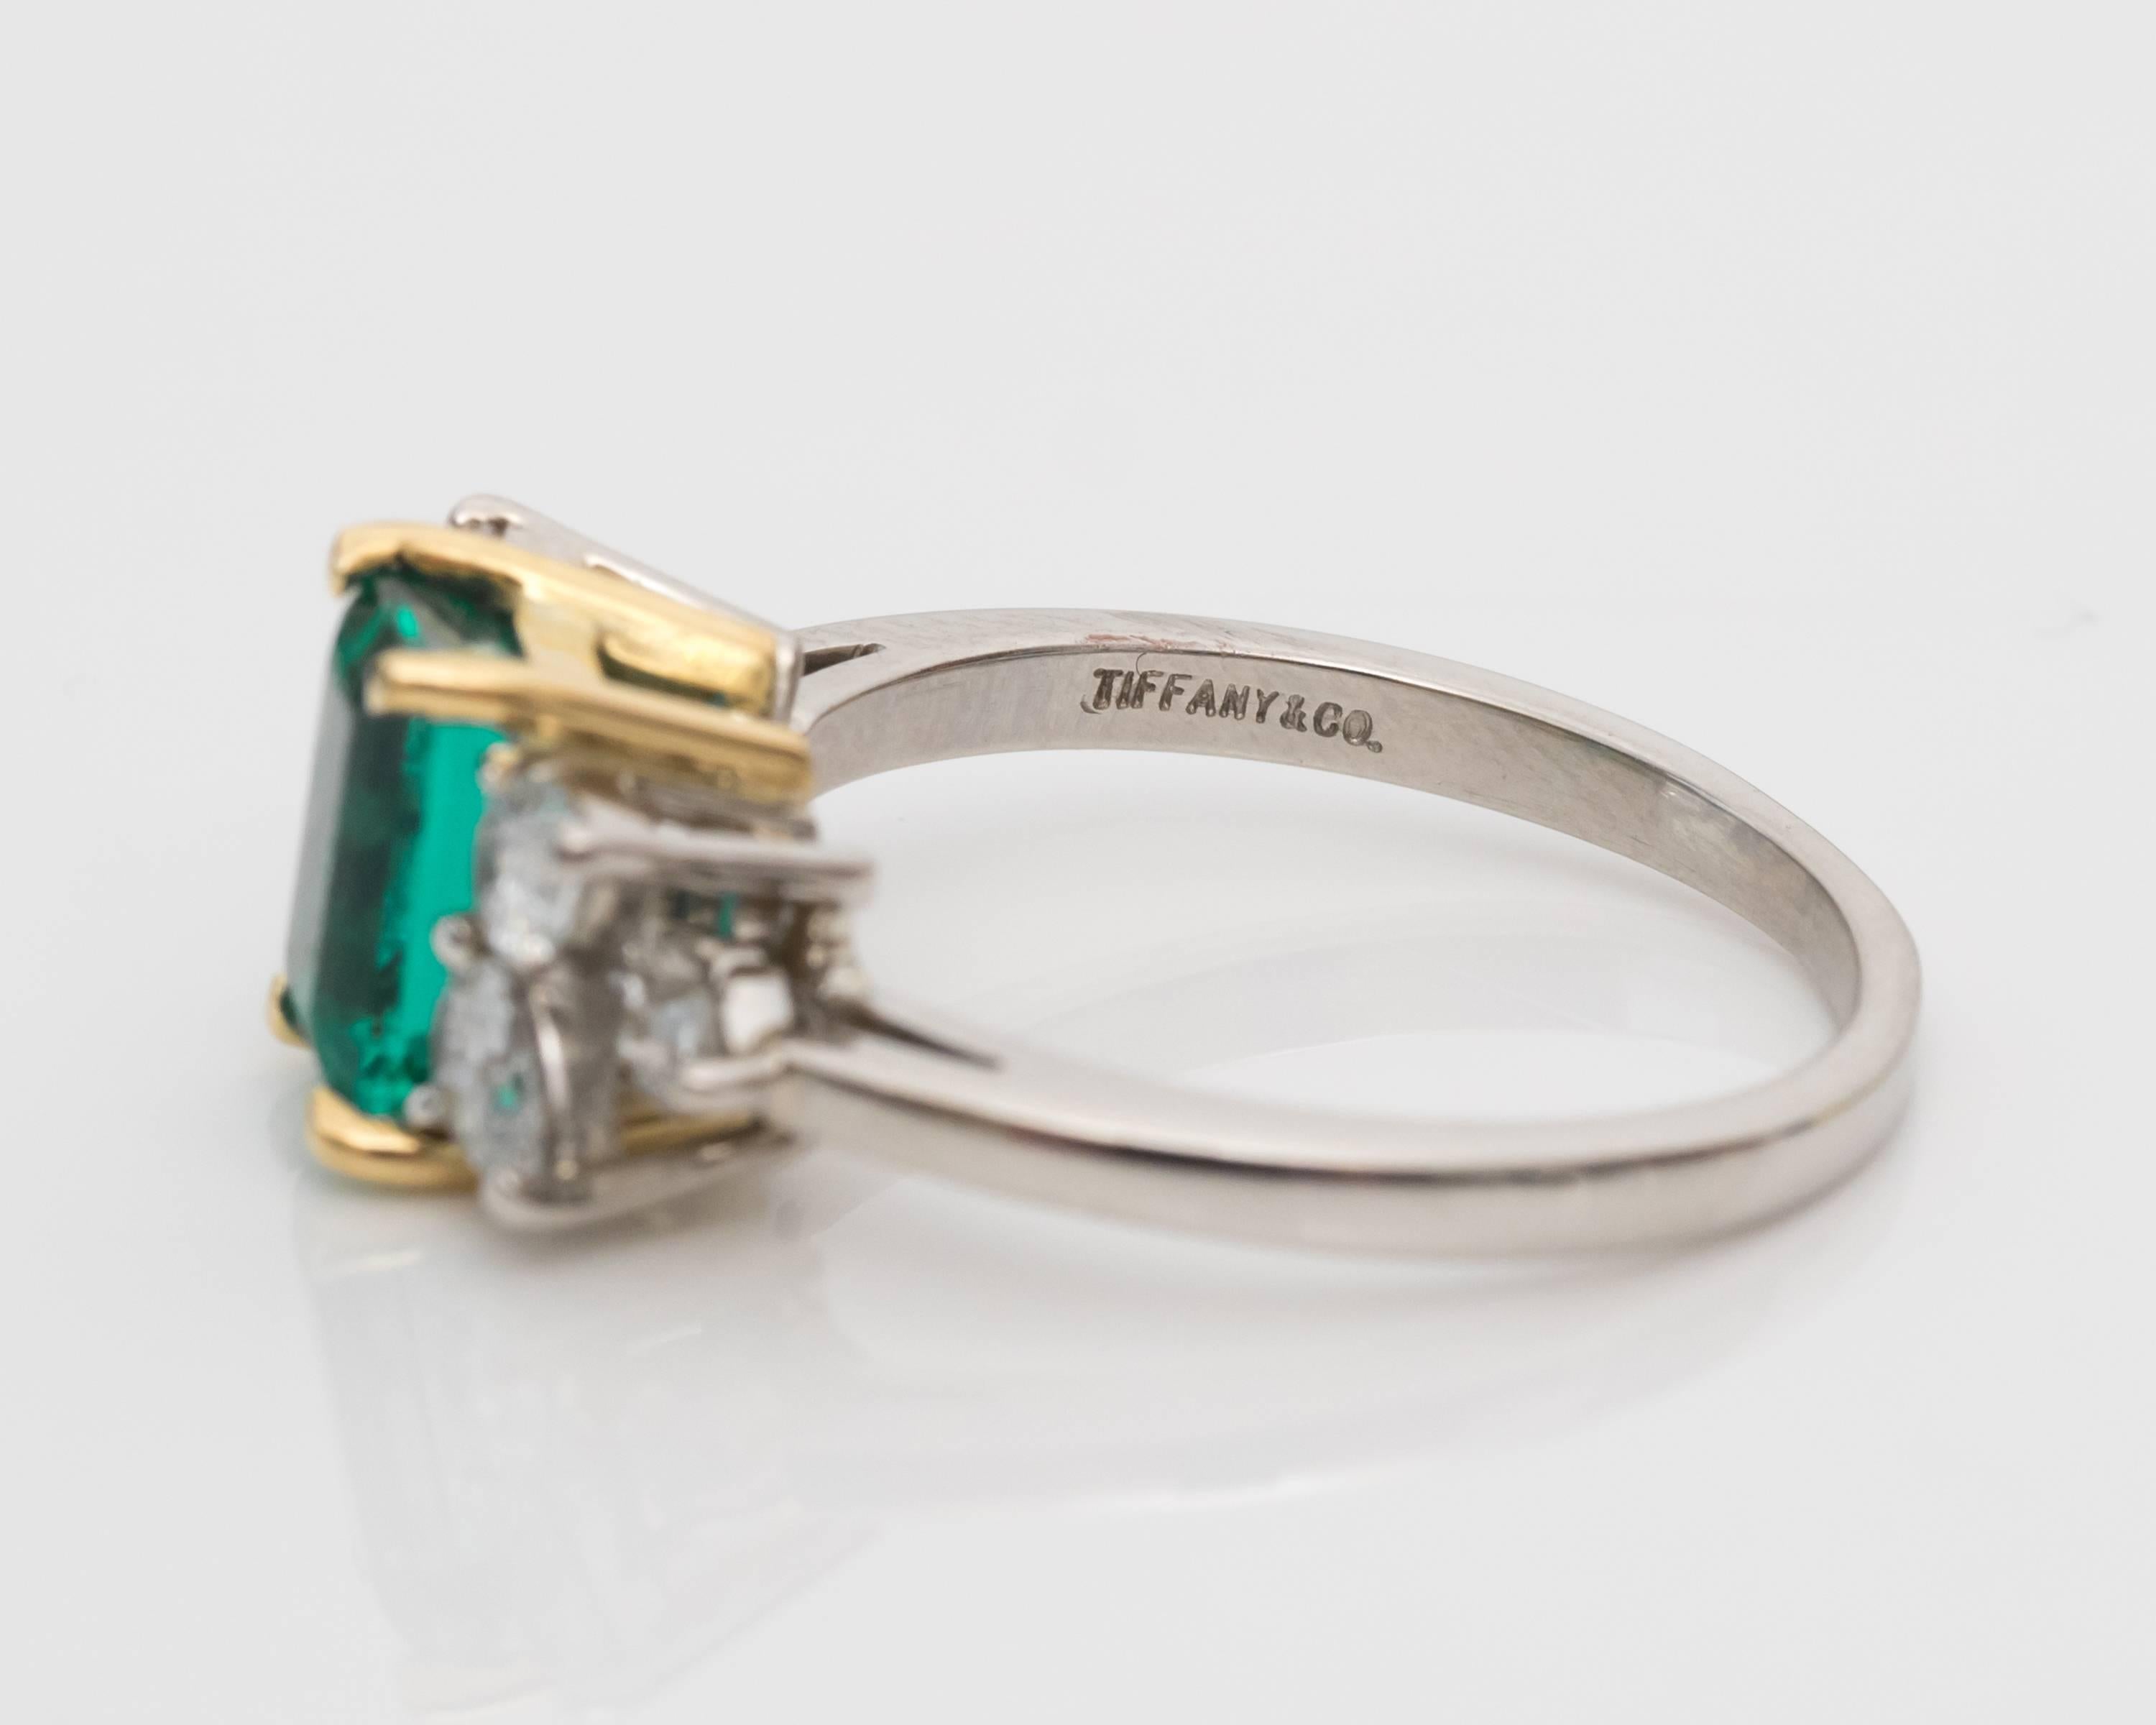 
1980s Tiffany & Co. 1ct Emerald and Diamond Platinum & 18k Yellow Gold Engagement Ring
1980s Tiffany & Co Engagement Ring featuring 1 carat Emerald and .50 carat total weight Diamonds
Two-Tone, Platinum and 18 Karat Yellow Gold

Authentic Tiffany &